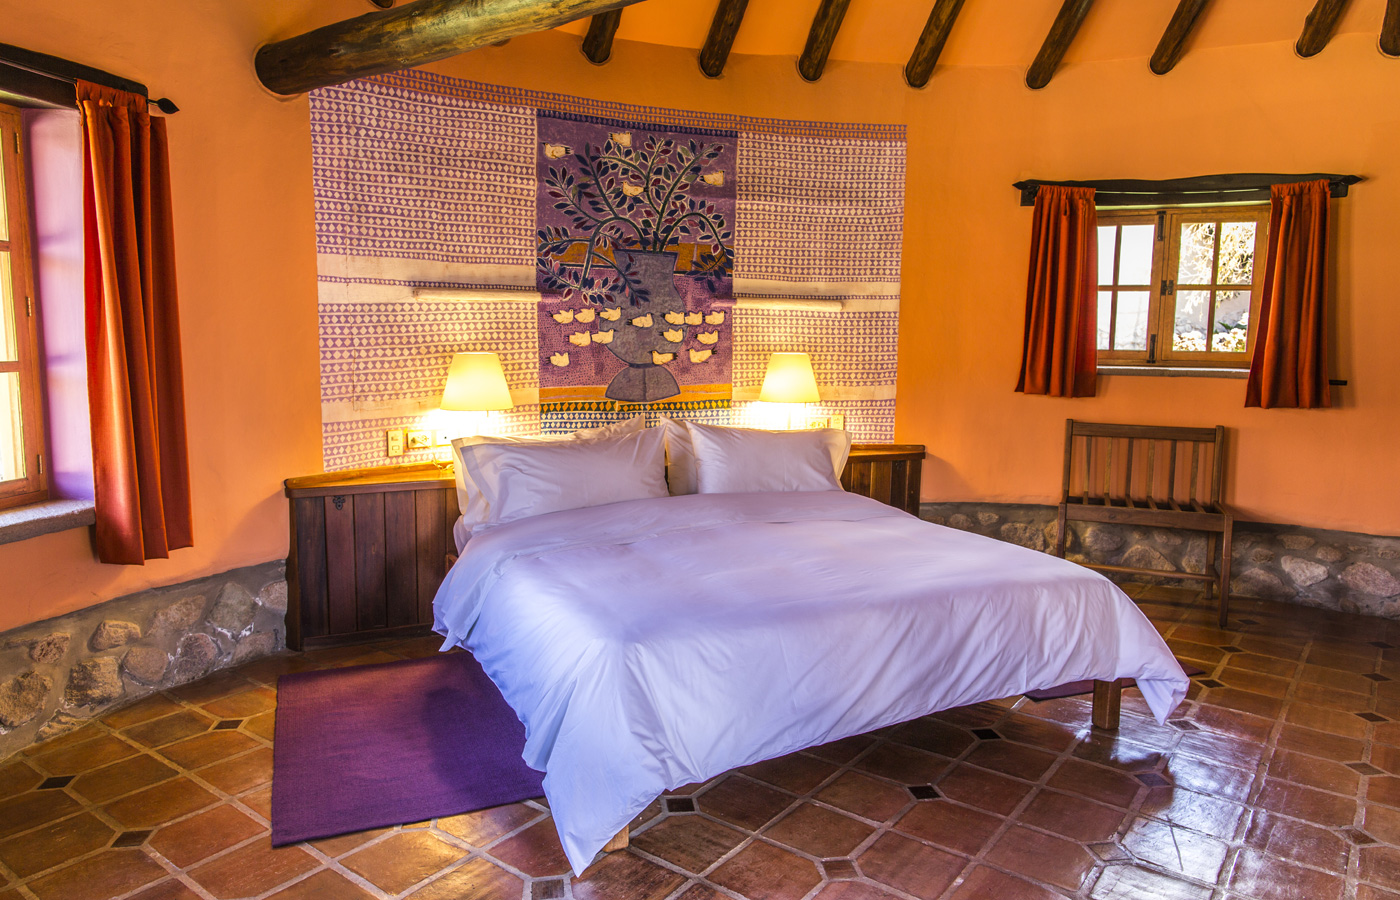 A charming casita room at Sol y Luna lodge in the Sacred Valley of the Incas. Urubamba Valley, Peru.